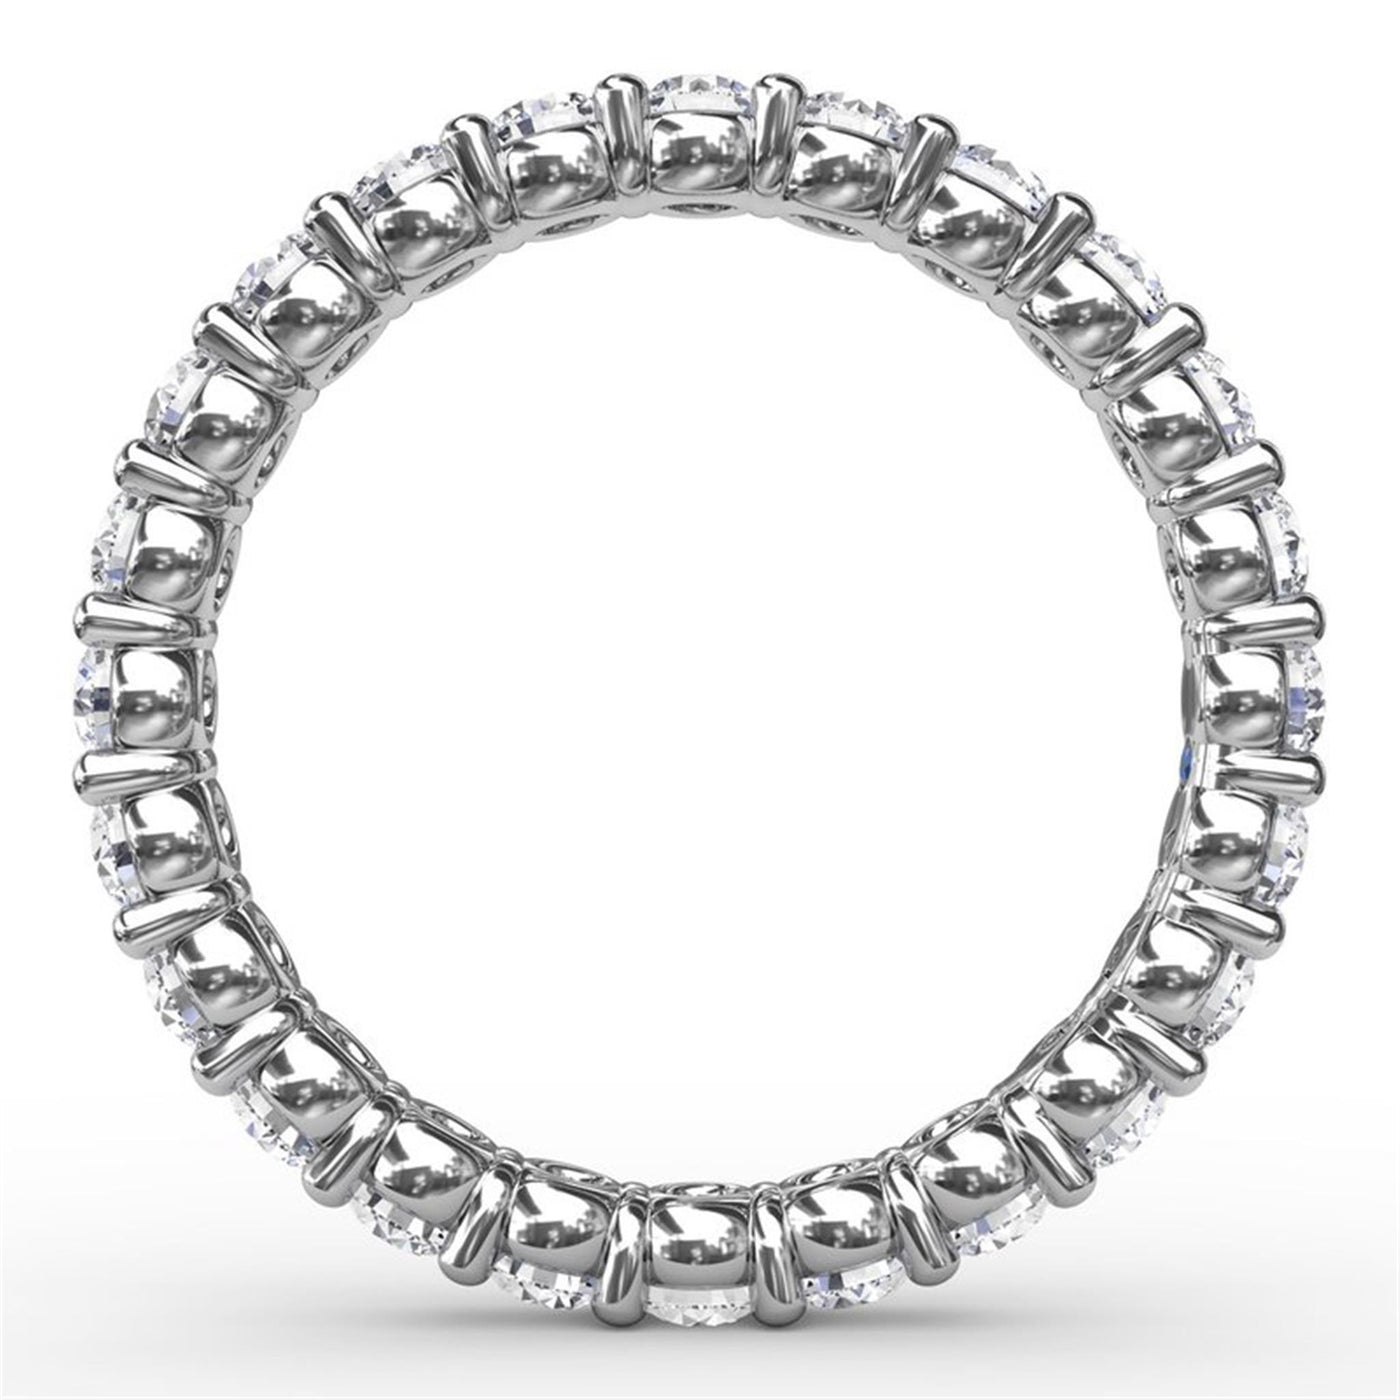 14K White Gold 1.44ctw Diamond Eternity Band 
Featuring a Polished Finish